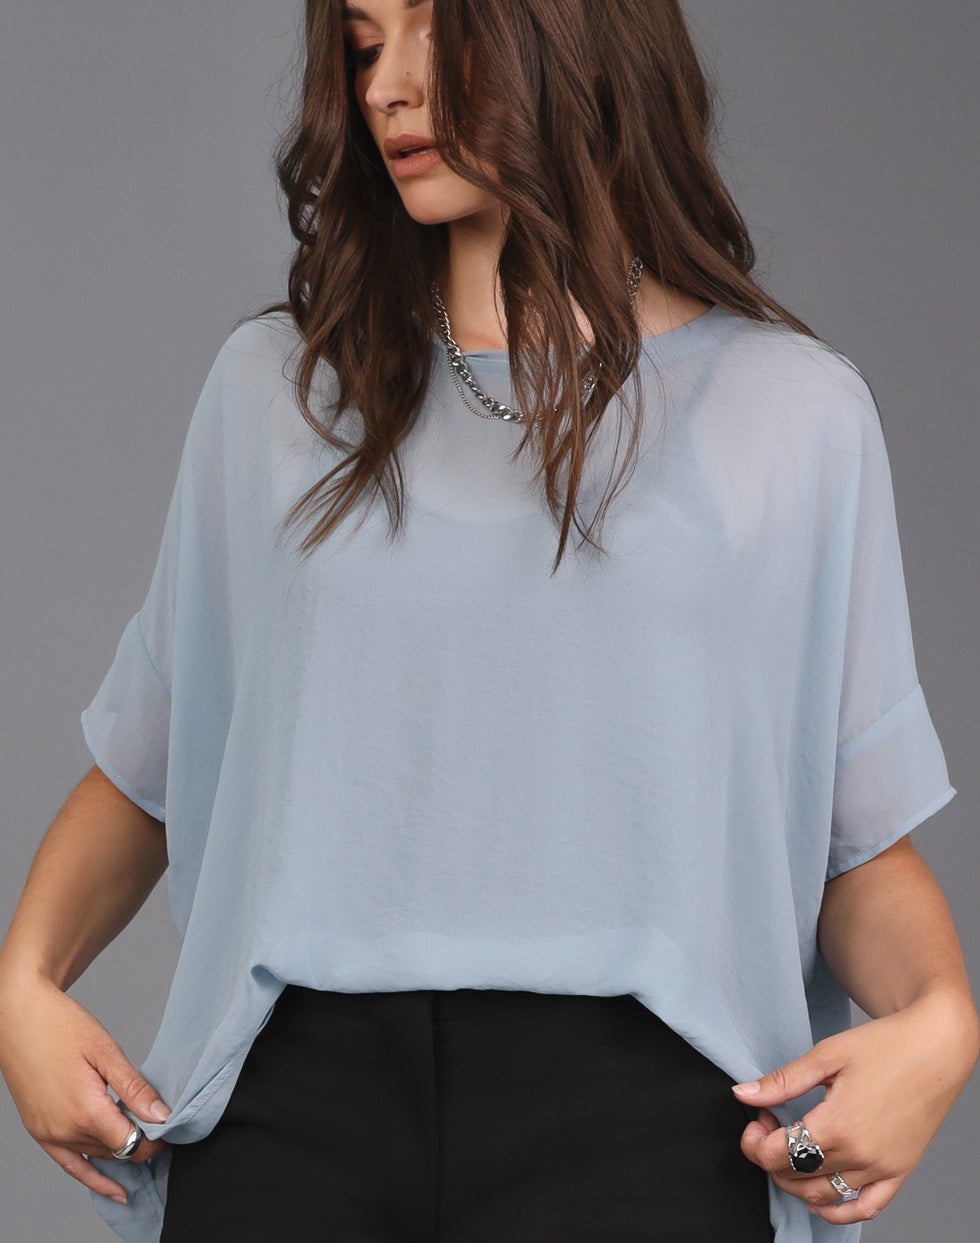 Relaxed Sheer Short Sleeve Top - Dusty Blue